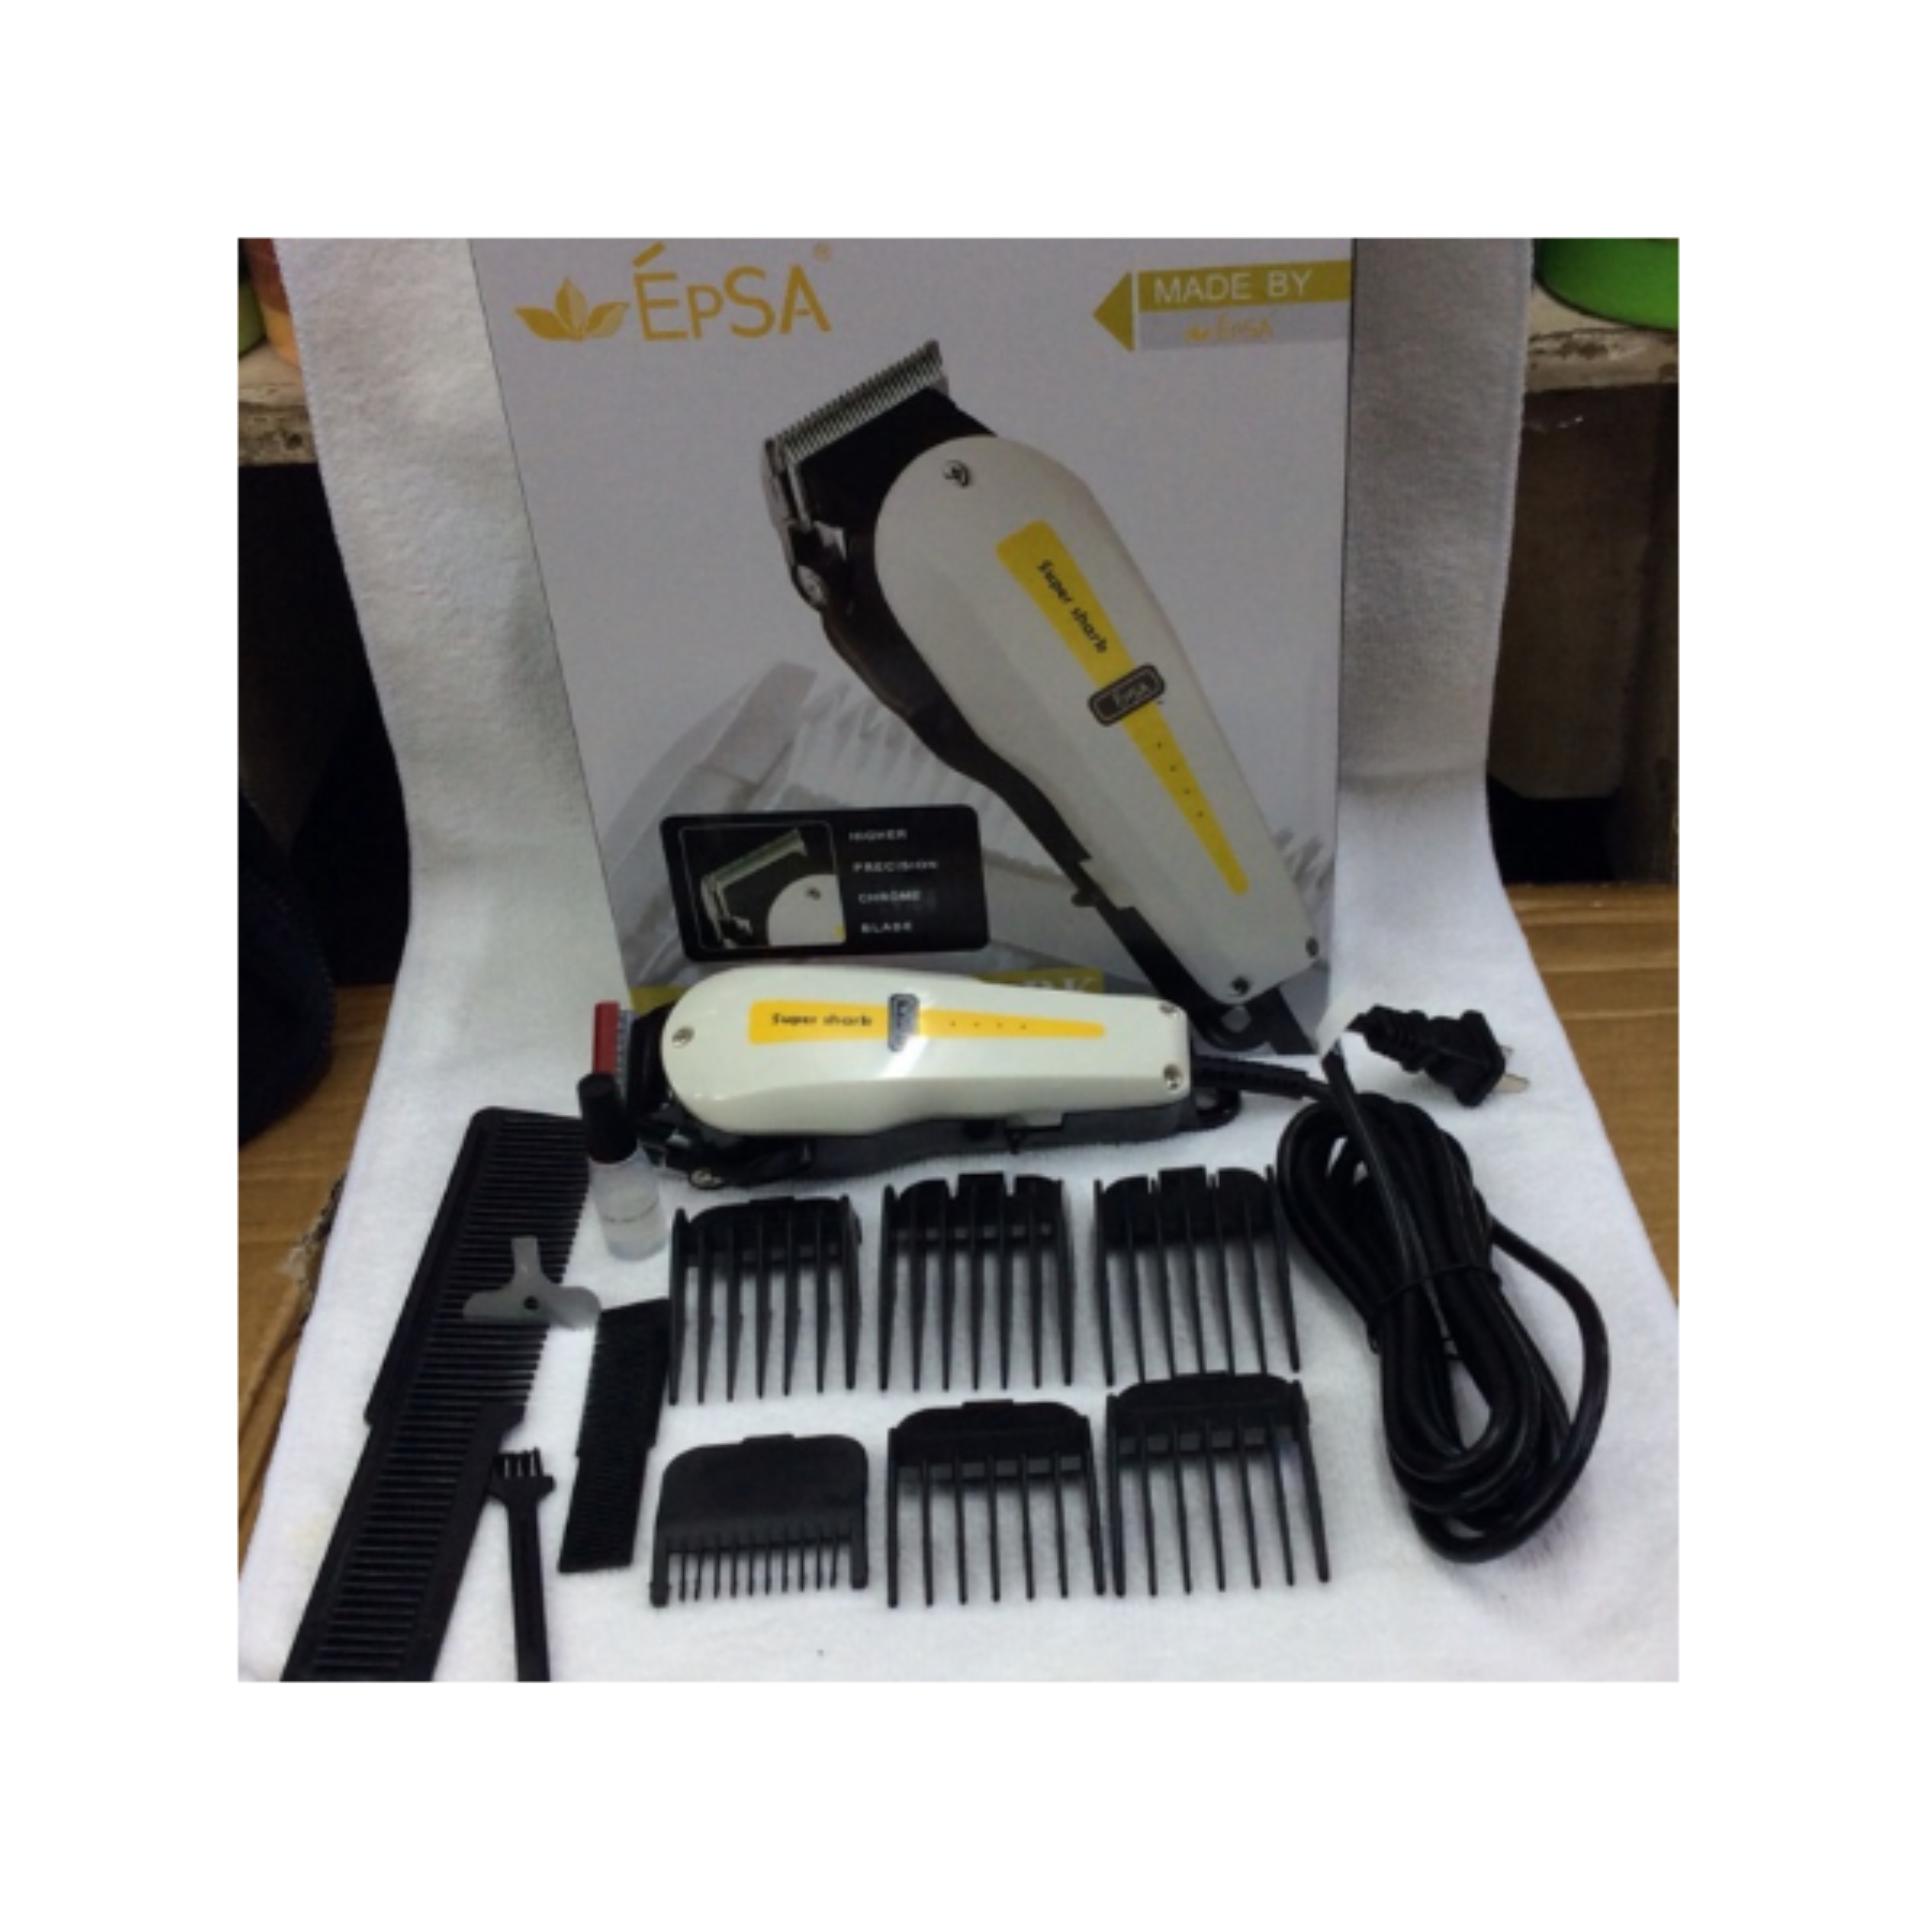 clipper sets for sale